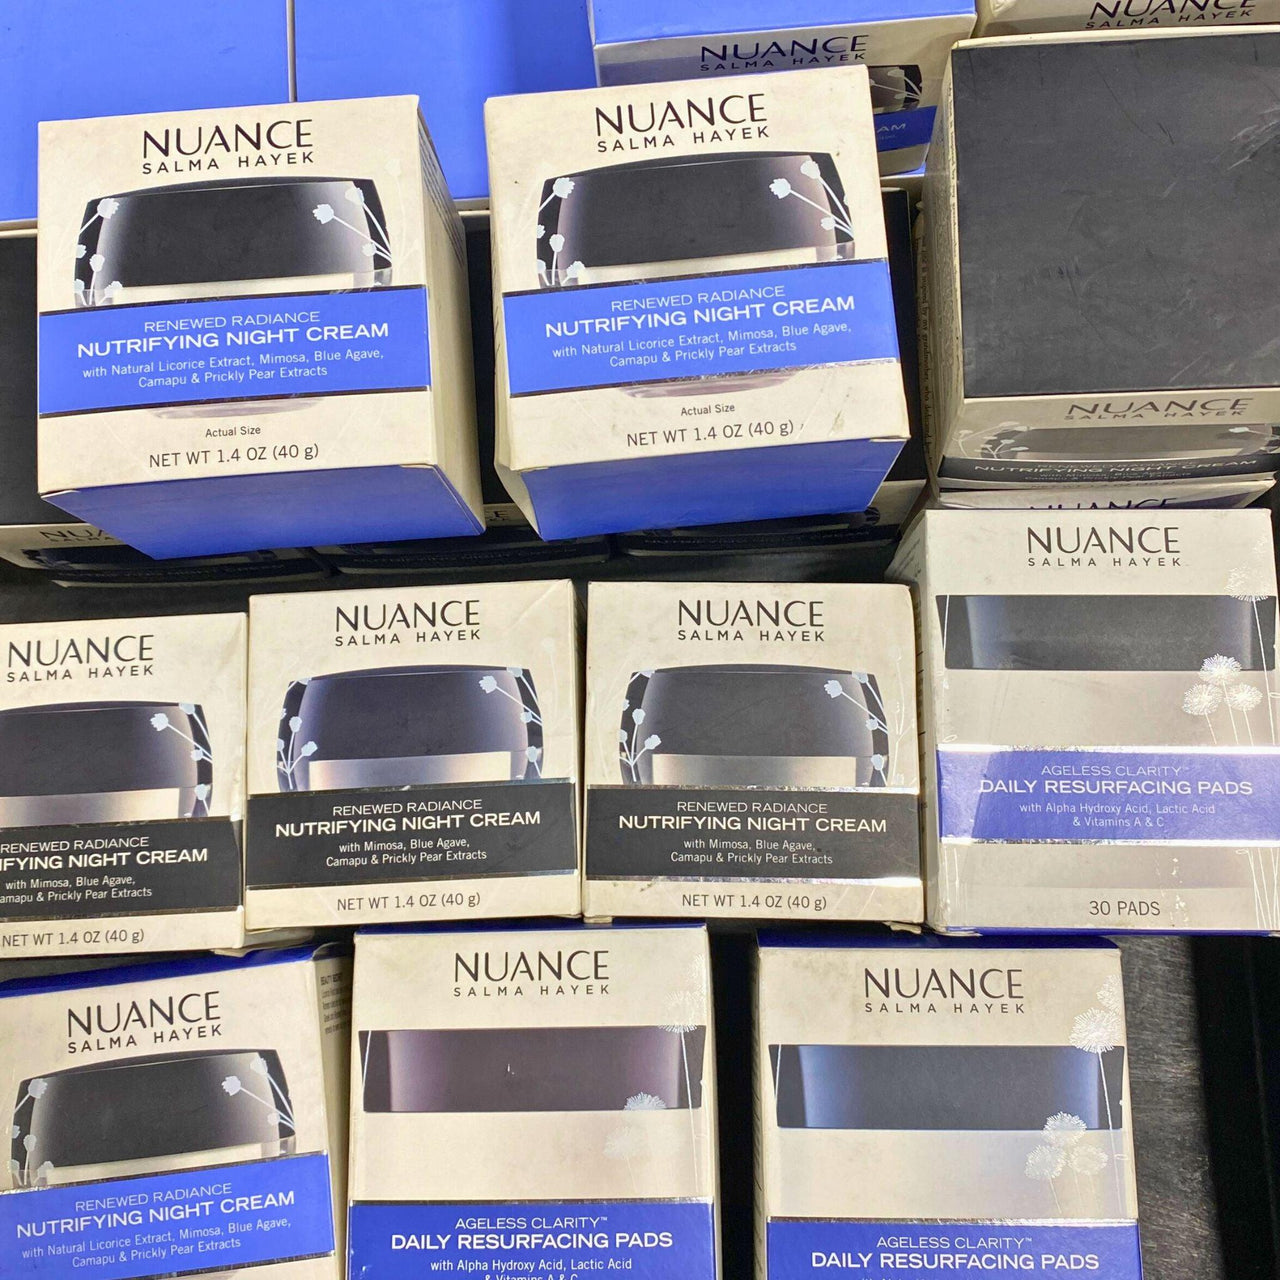 Nuance Salma Hayek Assorted Mix - includes Renewed Radiance Nutrifying Night Cream and Ageless Clarity Daily Resurfacing Pads (20 Pcs Lot) - Discount Wholesalers Inc